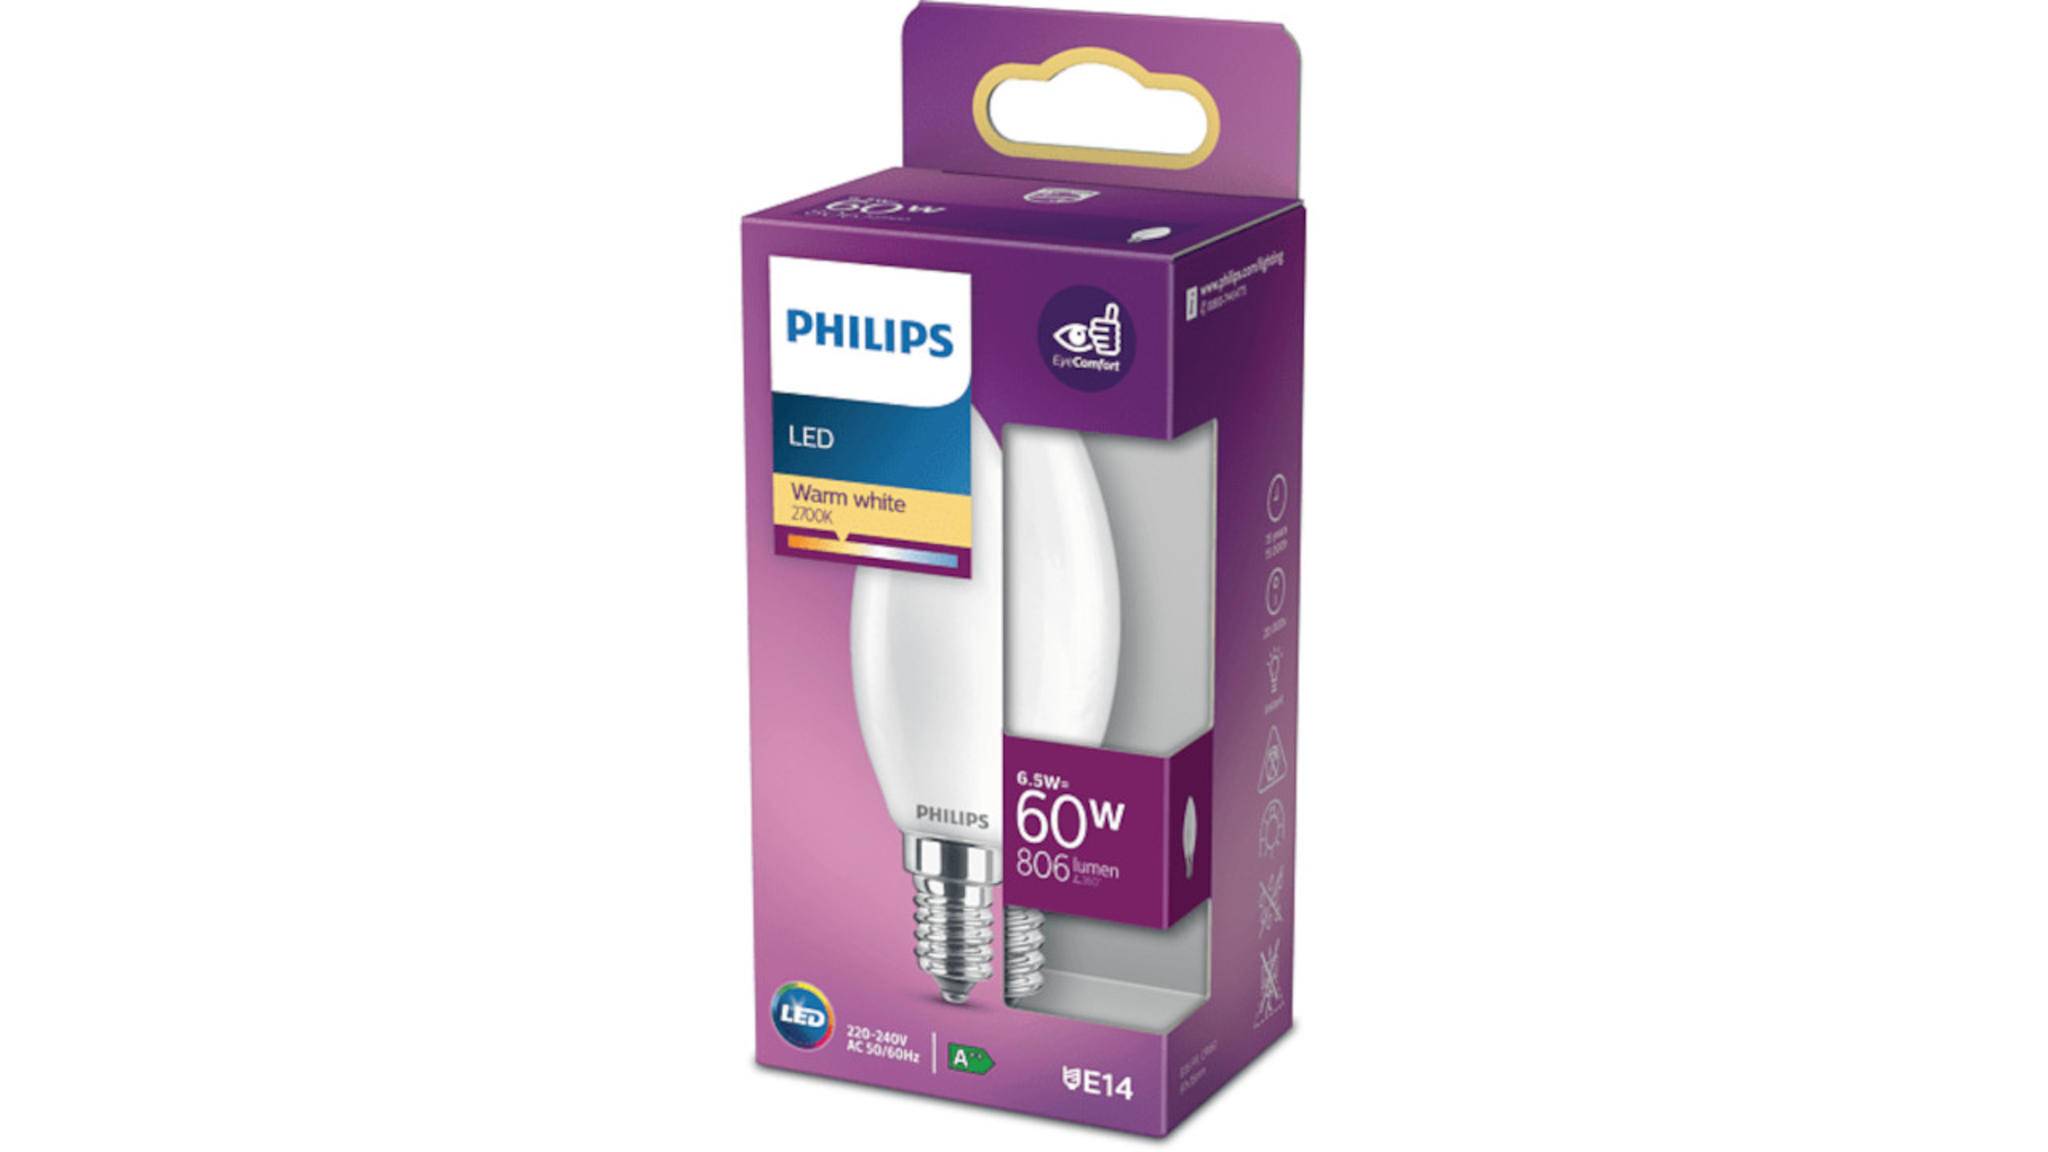 The brand manufacturer Philips offers LED lights that replace 60W incandescent bulbs.